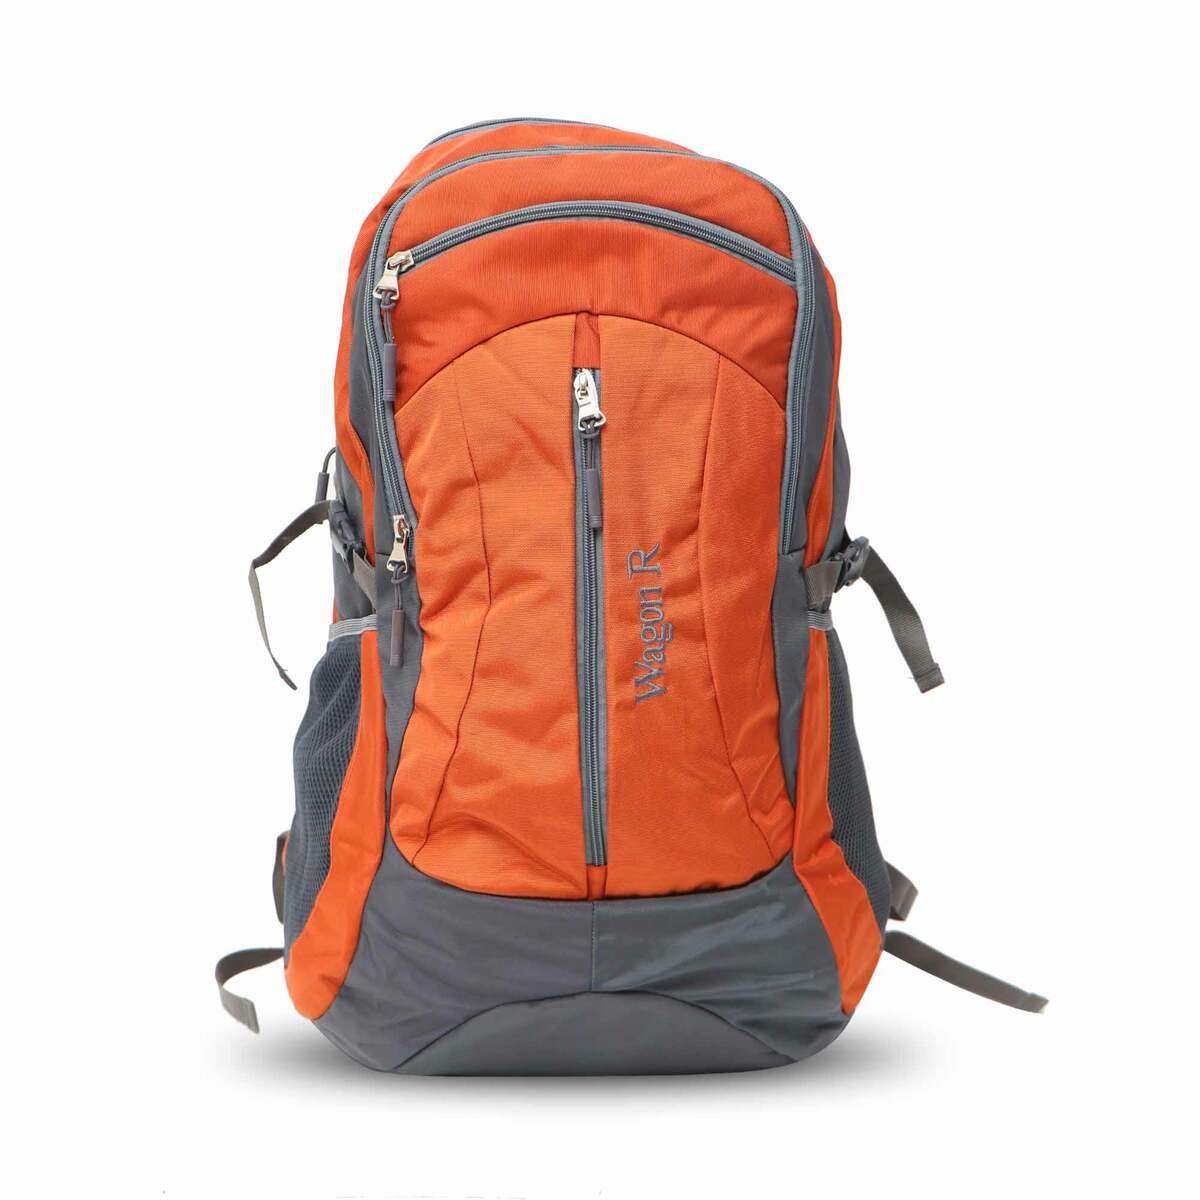 Wagon-R Vibrant Backpack 9012 19inch